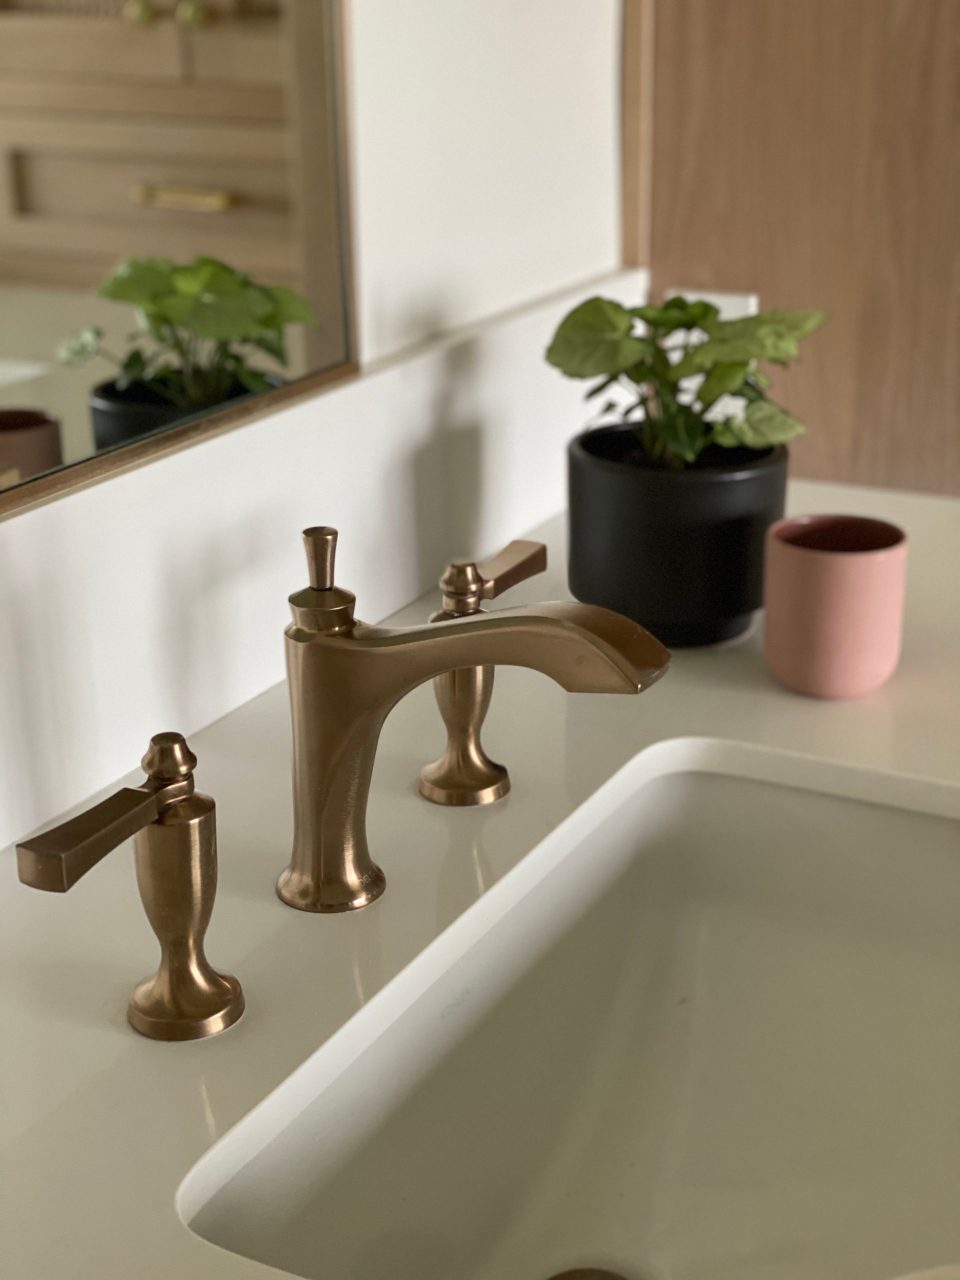 The Dorval faucet with lever handles, up close